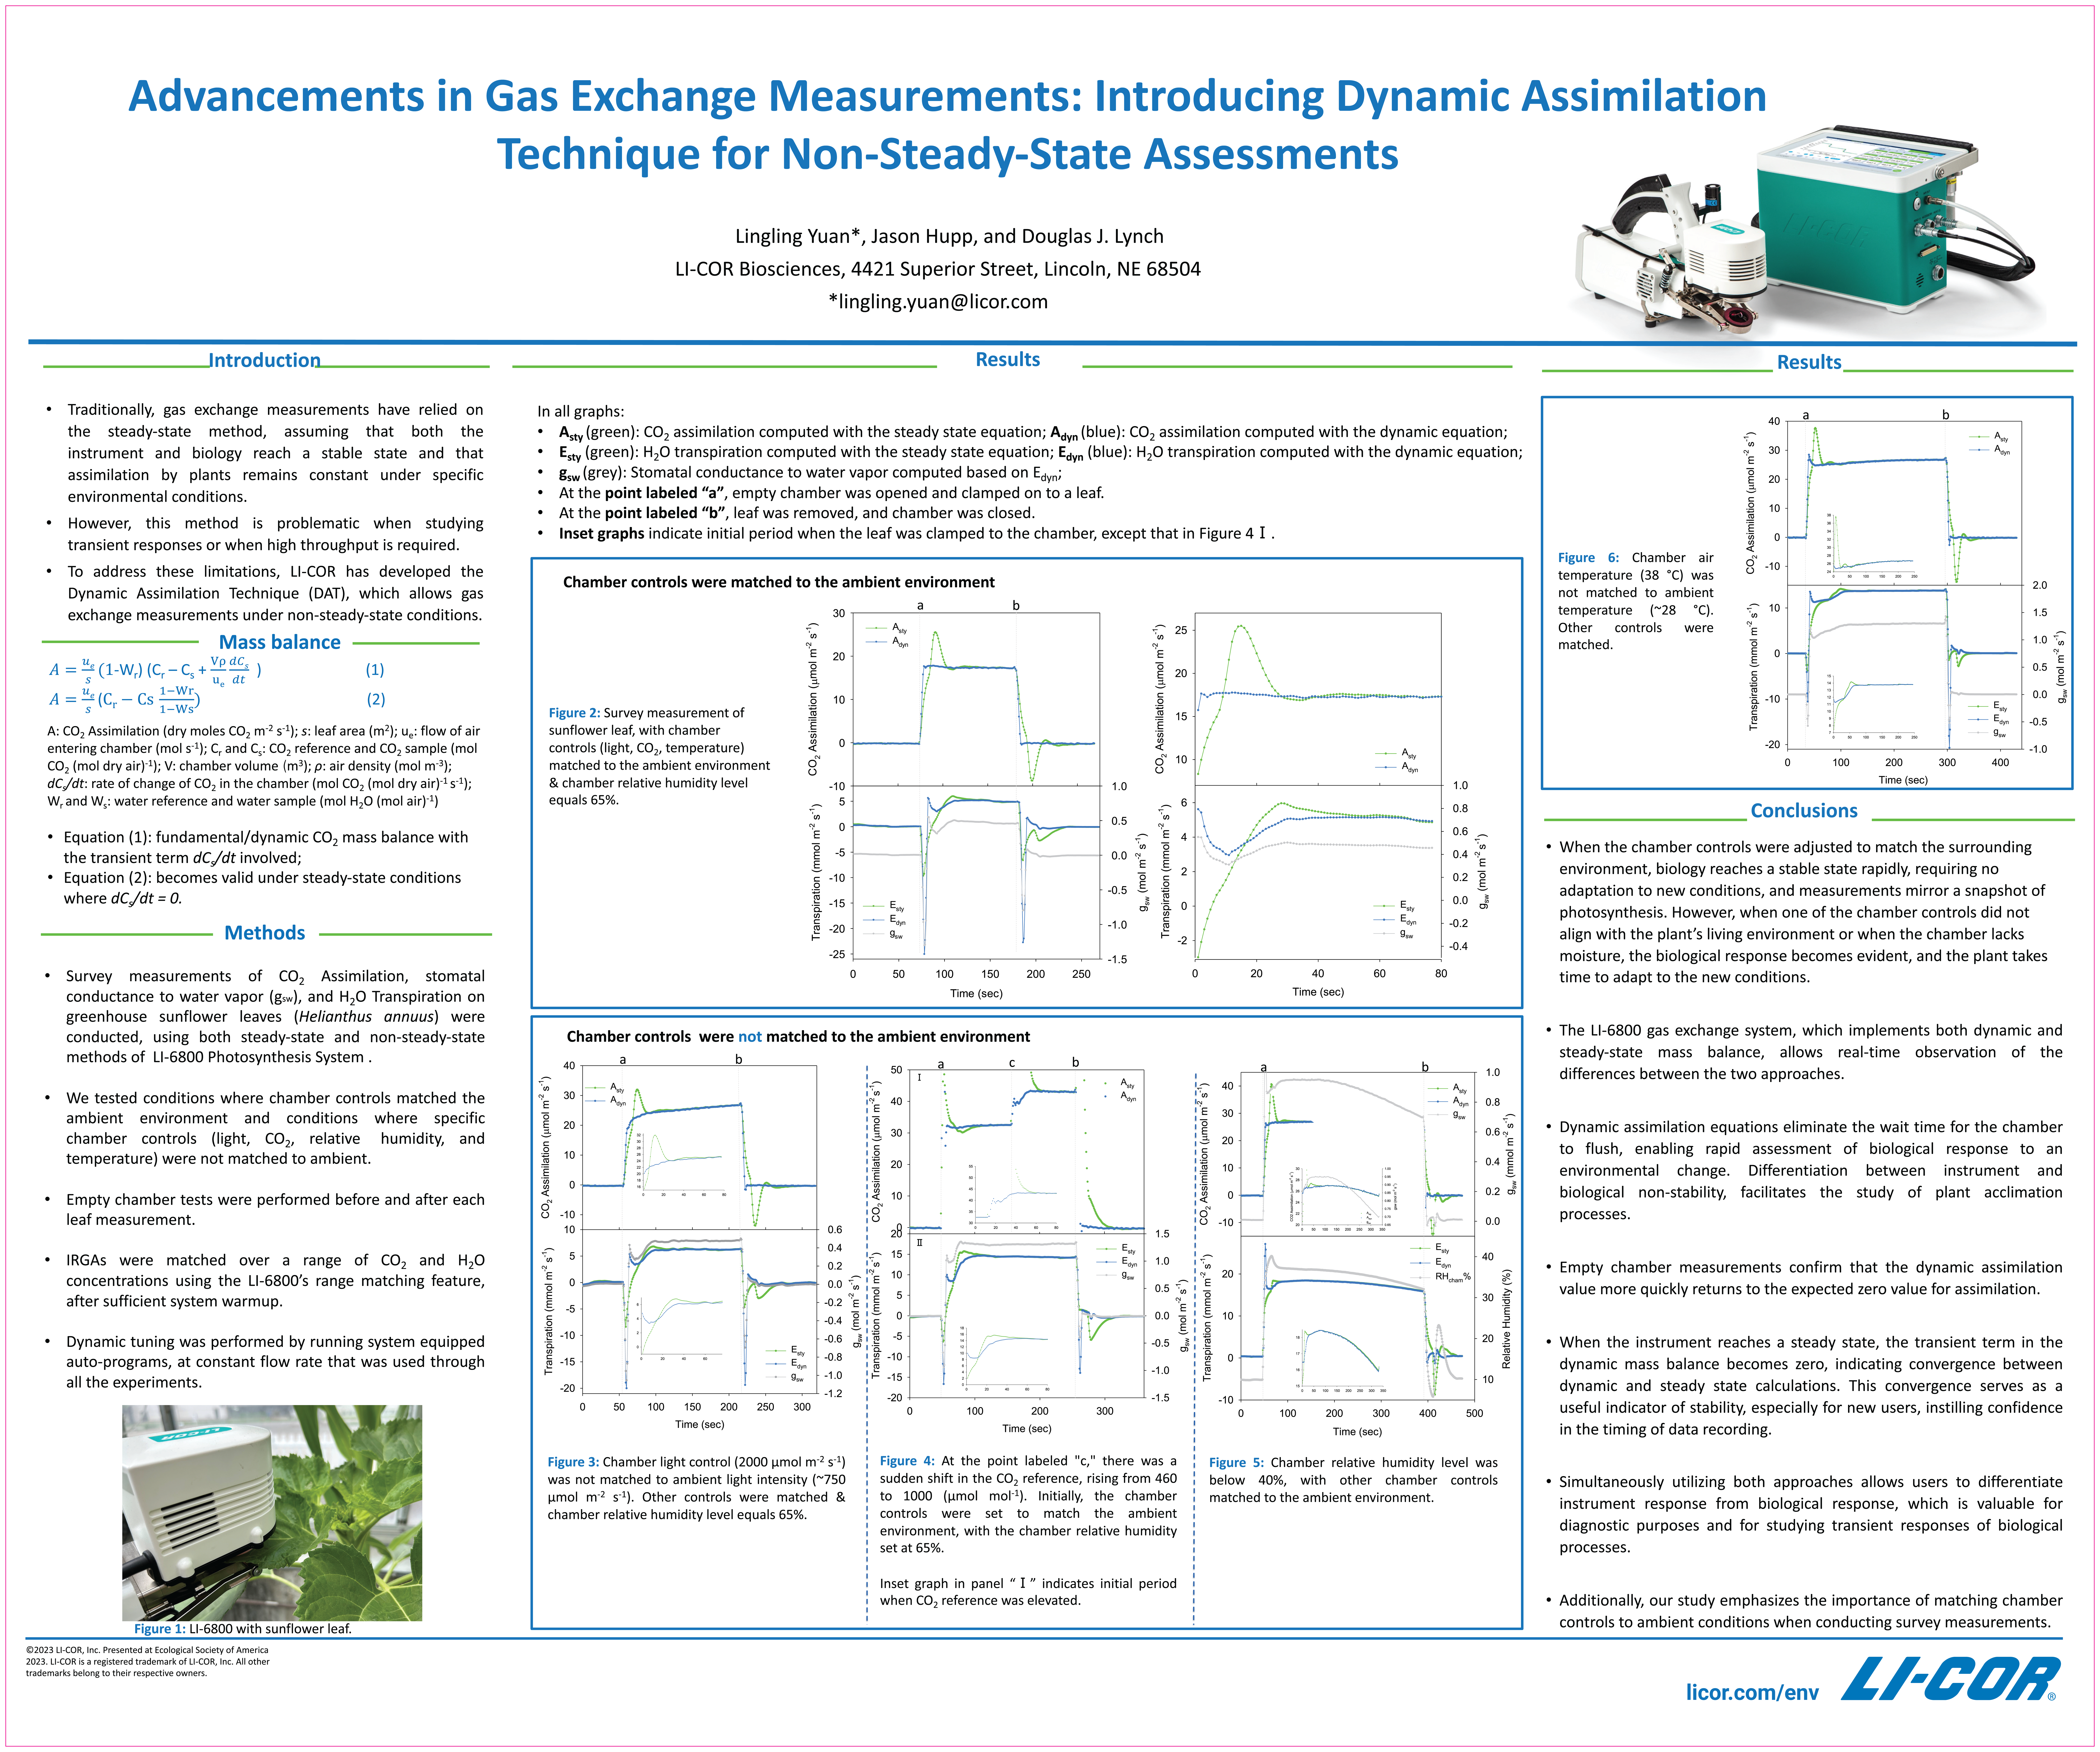 Advancements in Gas Exchange Measurements: Introducing Dynamic Assimilation Technique for Non-Steady-State Assessments